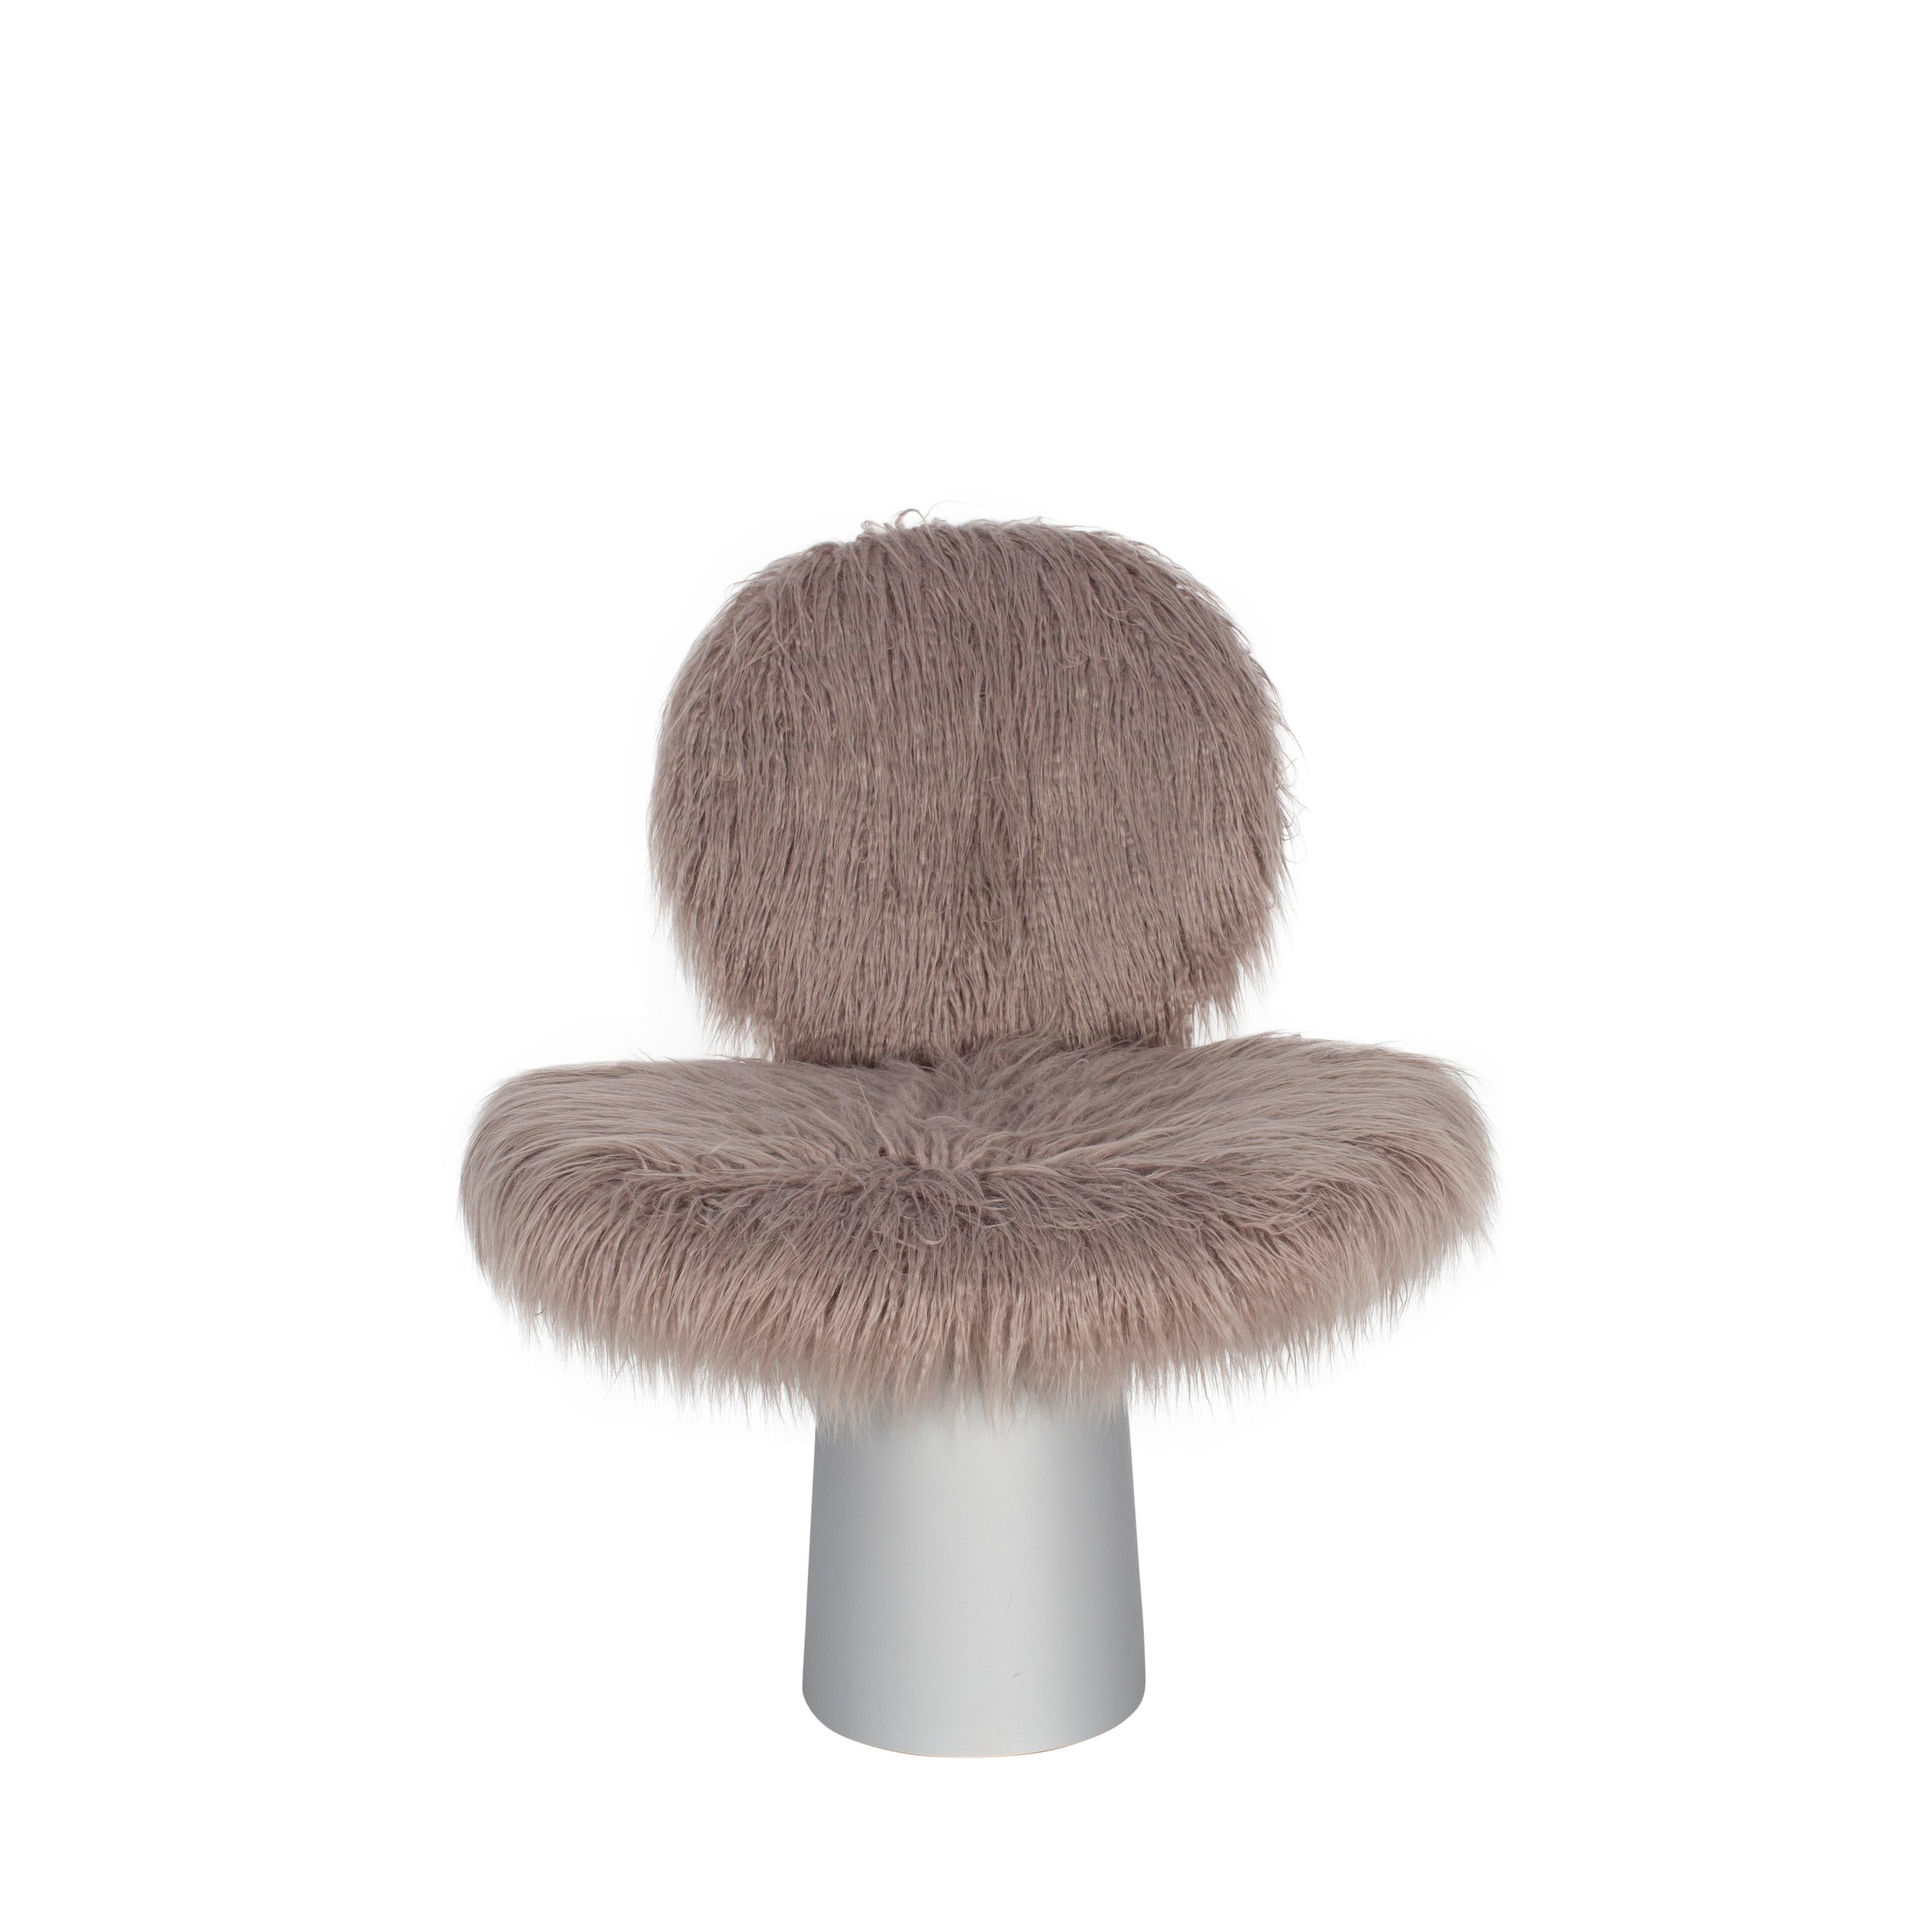 Pilota grey faux fur white aluminum lounge chair by Pulpo
Dimensions: D65 x W75 x H75 cm
Materials: leather, cord, faux fur, wool, powder coated metal

Also available in different colors and finishes.

Starting from a simple construction,